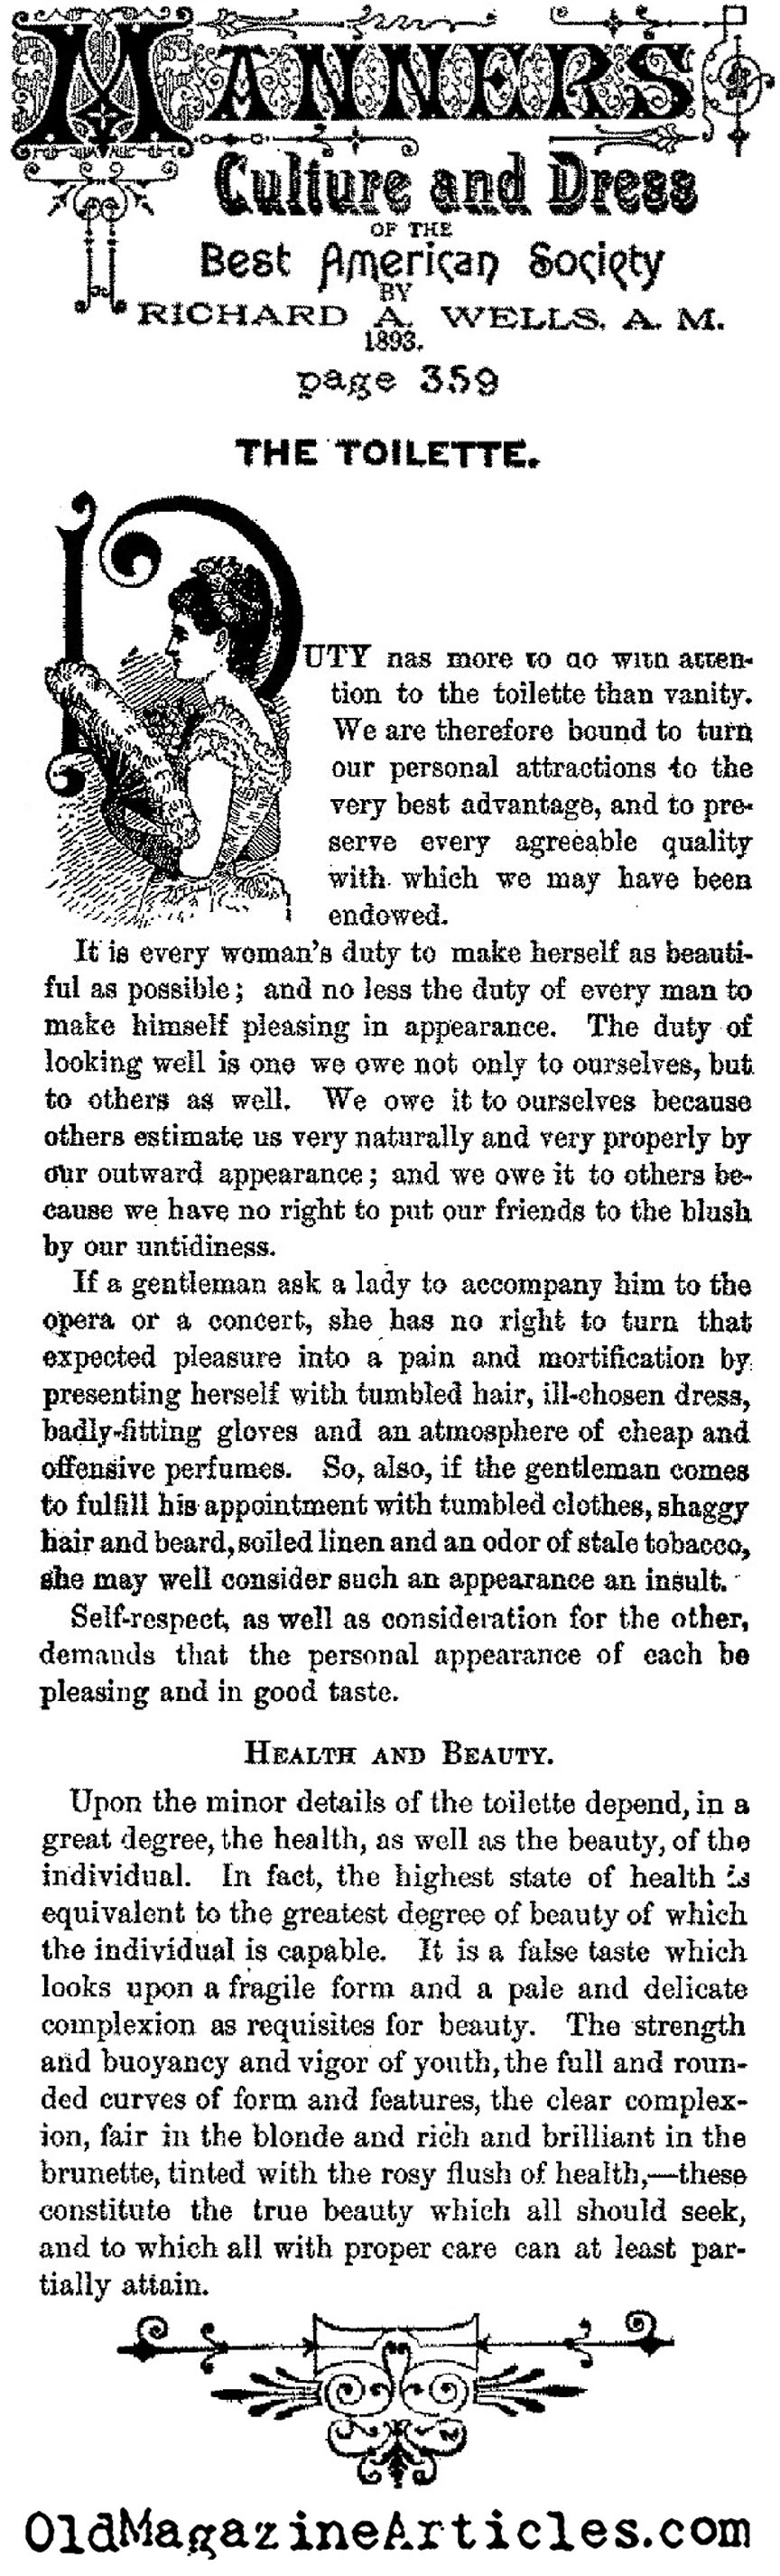 Beauty as Duty: A Victorian Appreciation (Manners, Culture and Dress, 1870)